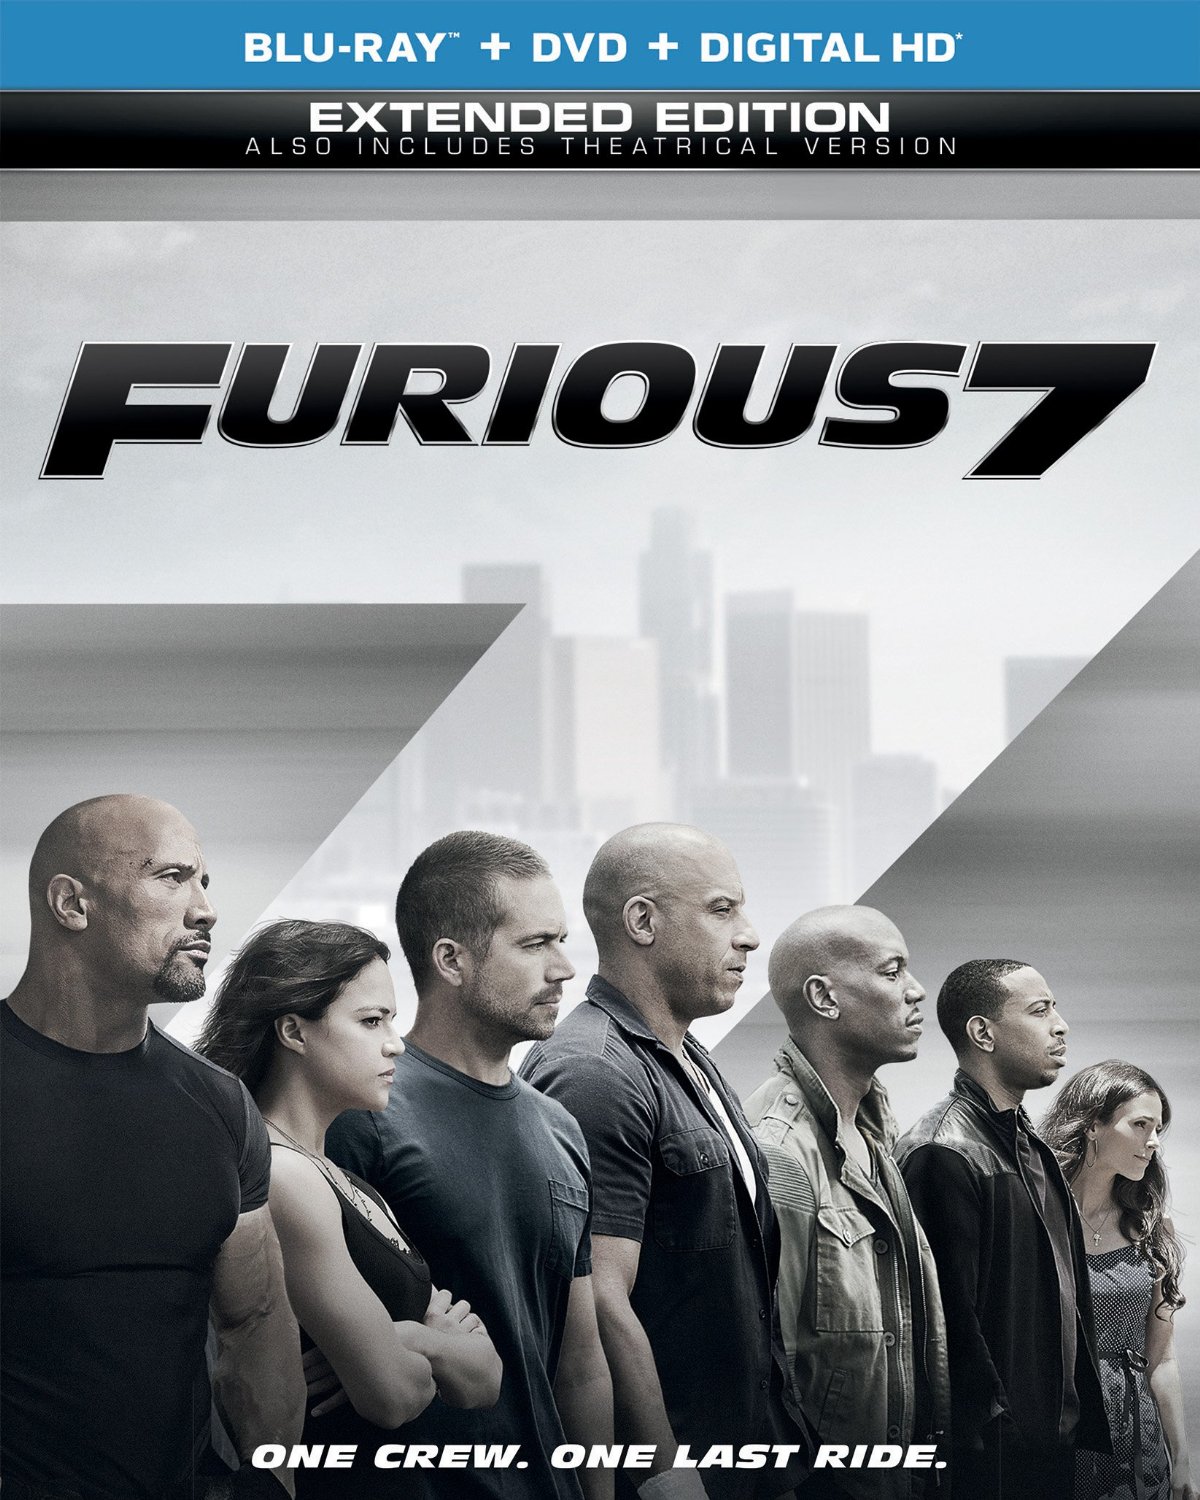 last ride song fast and furious 7 download